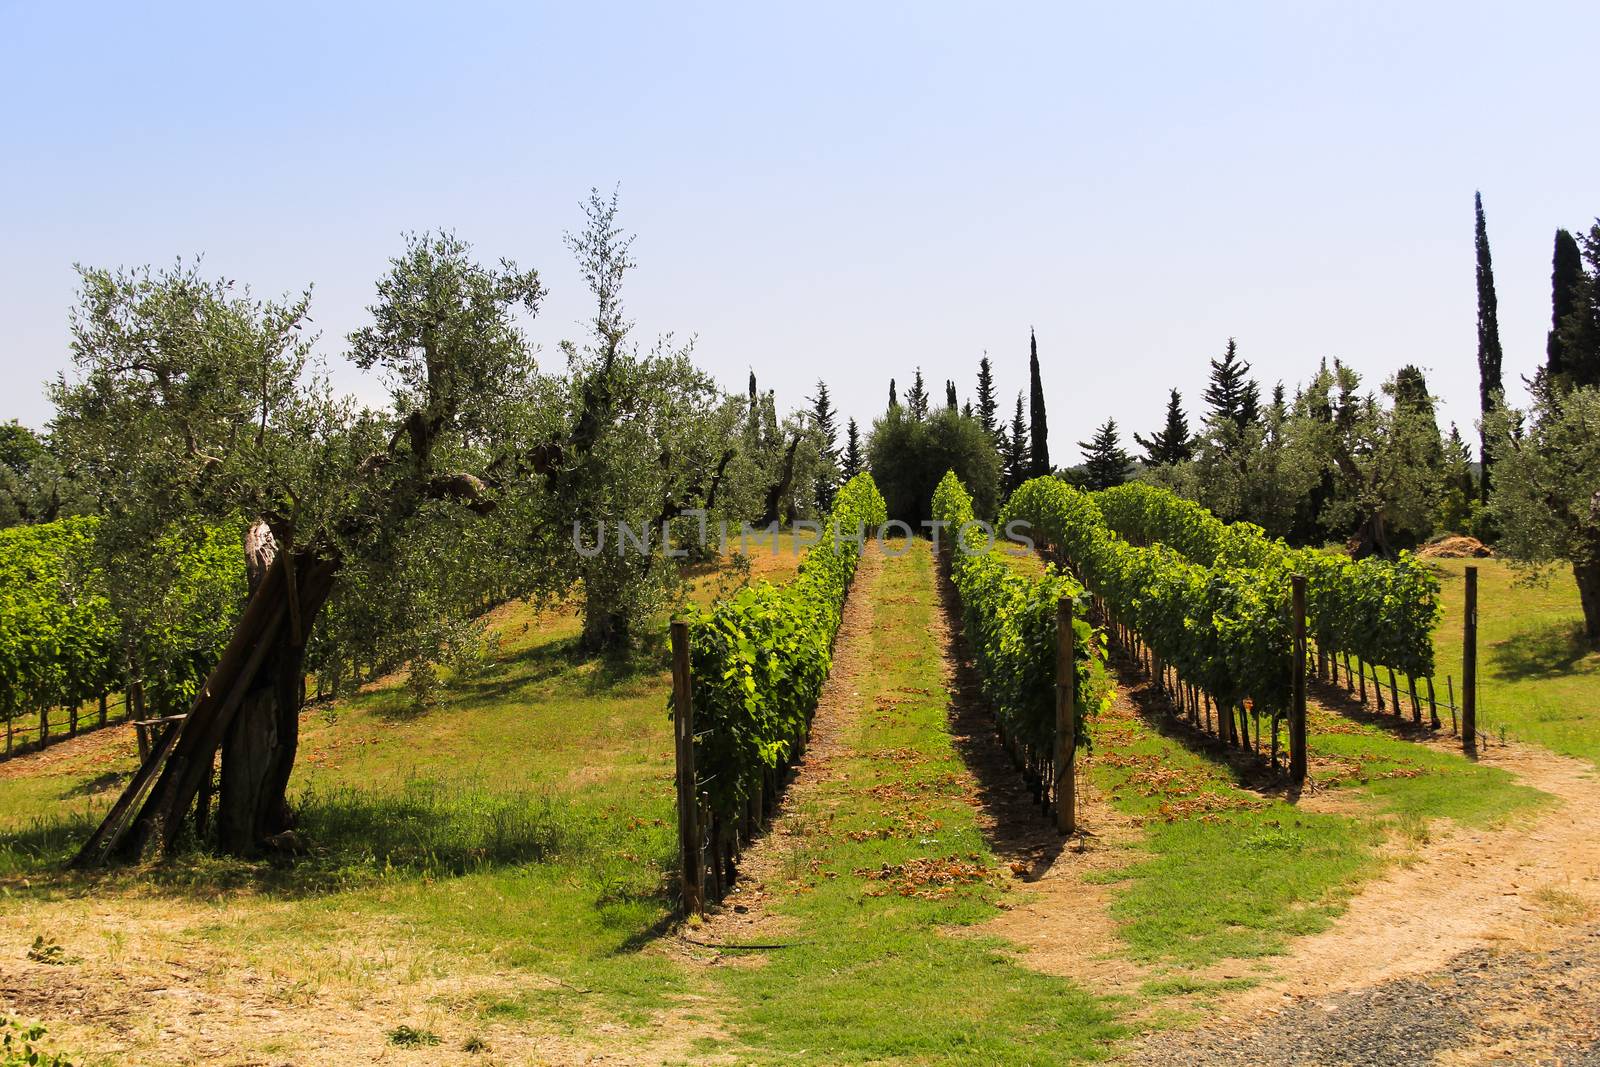 Rows of vines in the Tuscan countryside, in a beautiful summer day